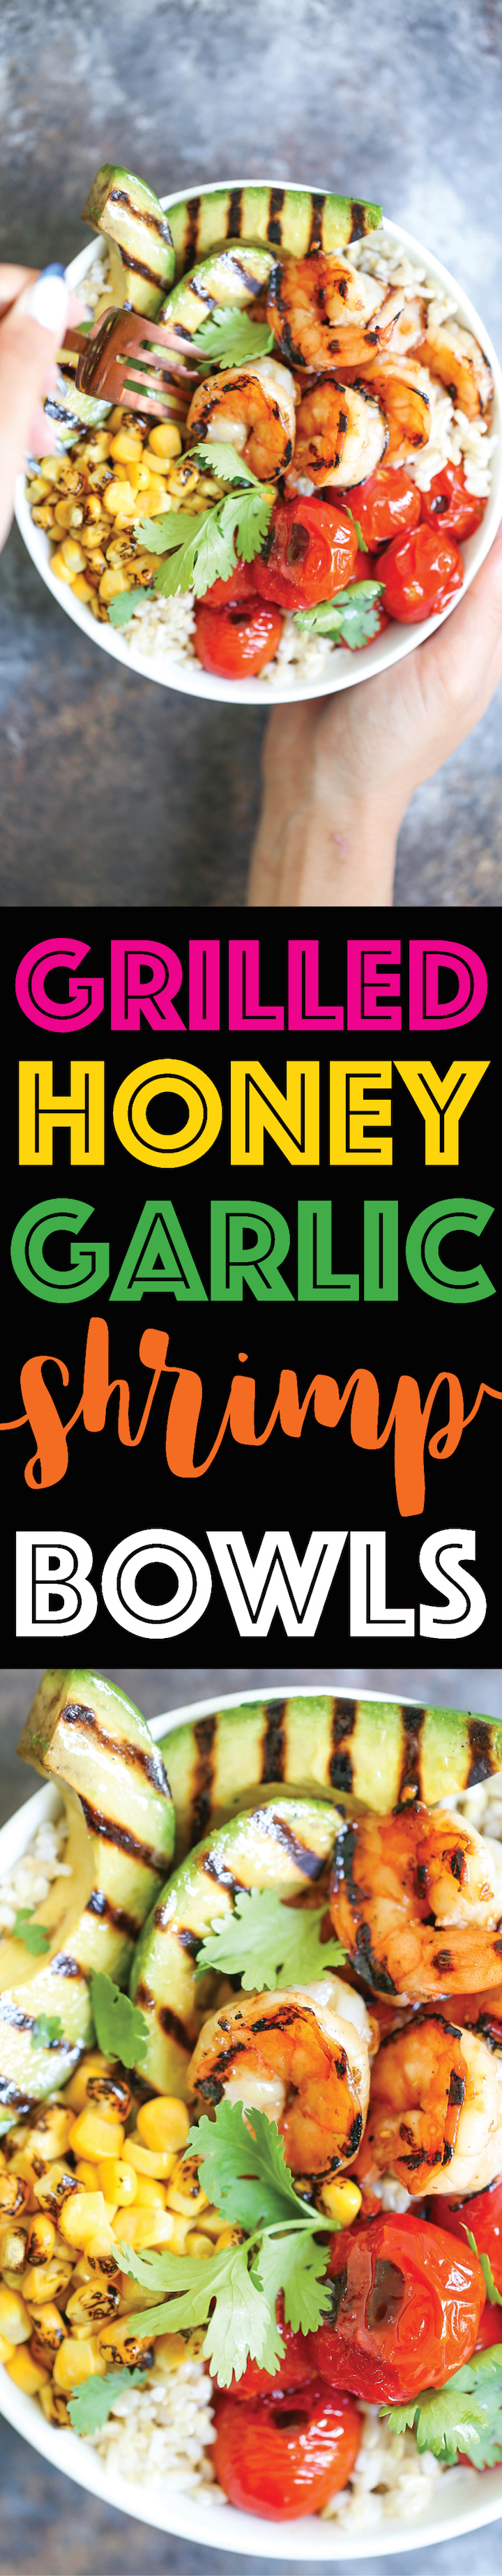 Grilled Honey Garlic Shrimp Bowls - So quick and easy! And that honey garlic sauce is AMAZING! No grill? You can easily saute this on a pan in minutes!!!